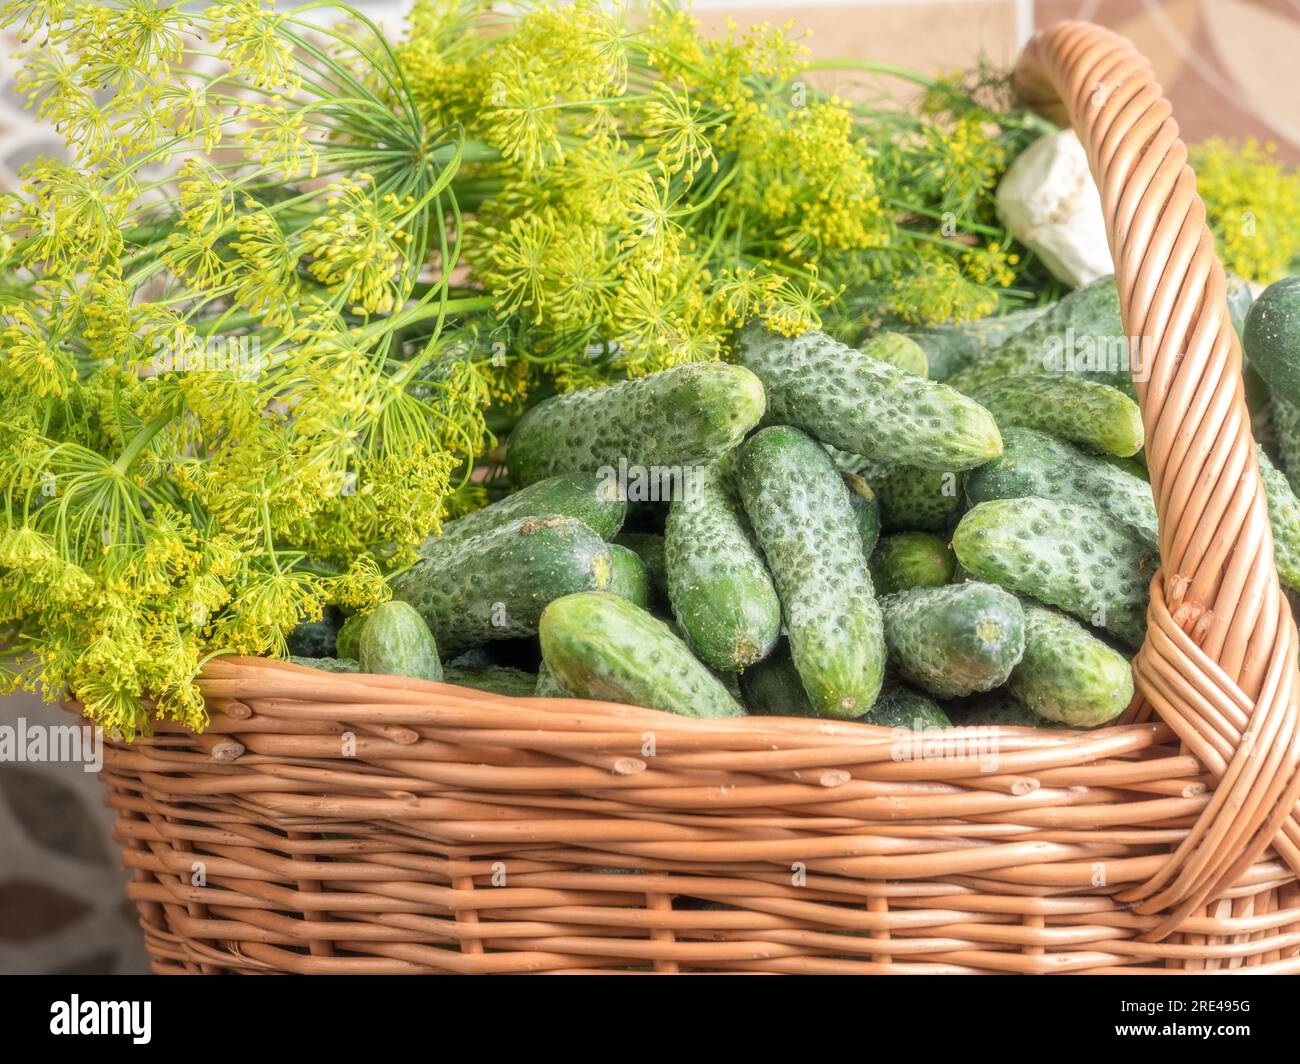 Pile of fresh pickling cucumbers with dill in wicker basket ready for pickling Stock Photo